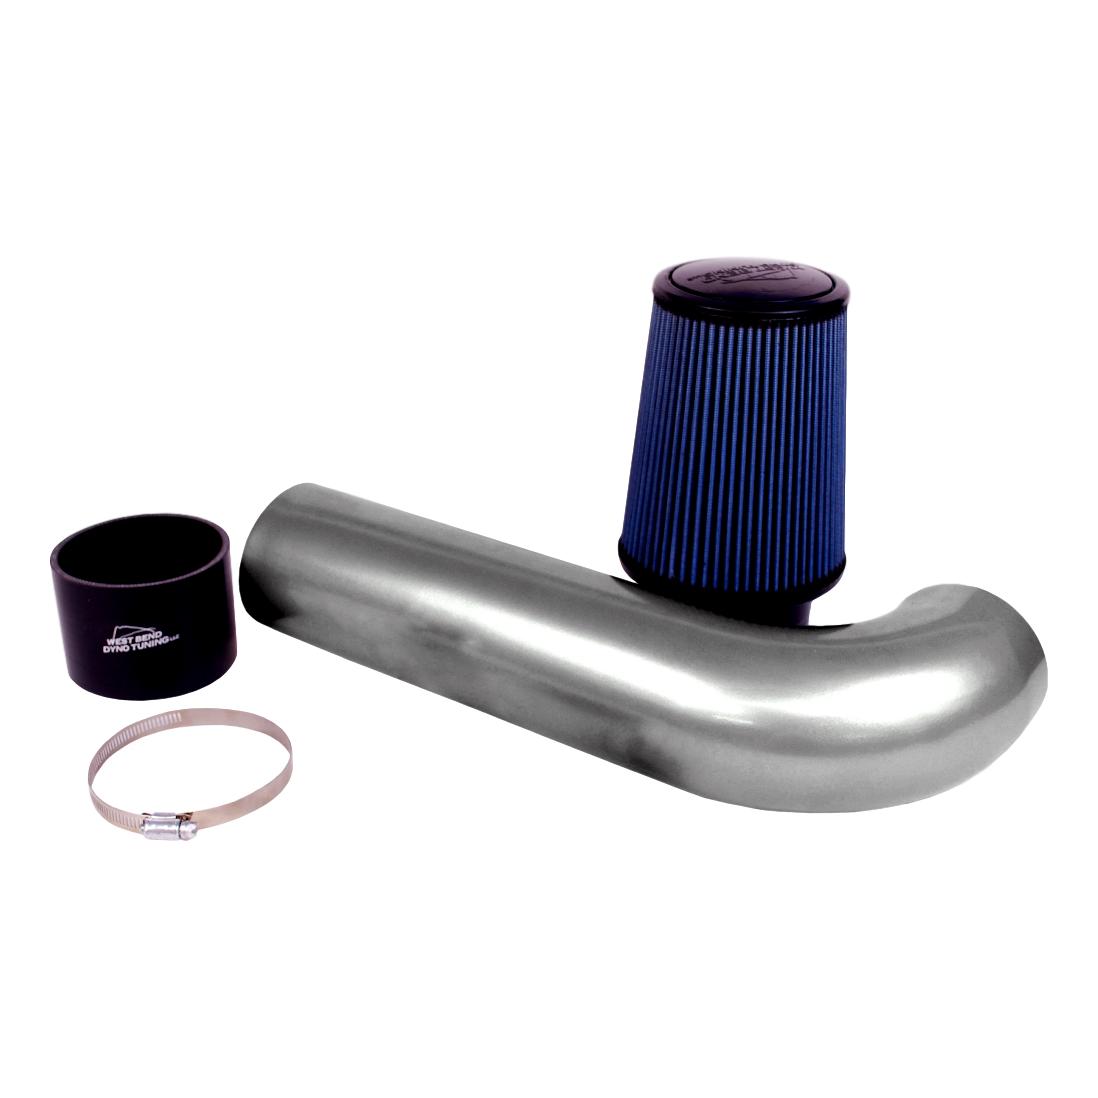 West Bend Dyno Ls Swap Universal Cold Air Intake Kit WBD - West Bend Dyno